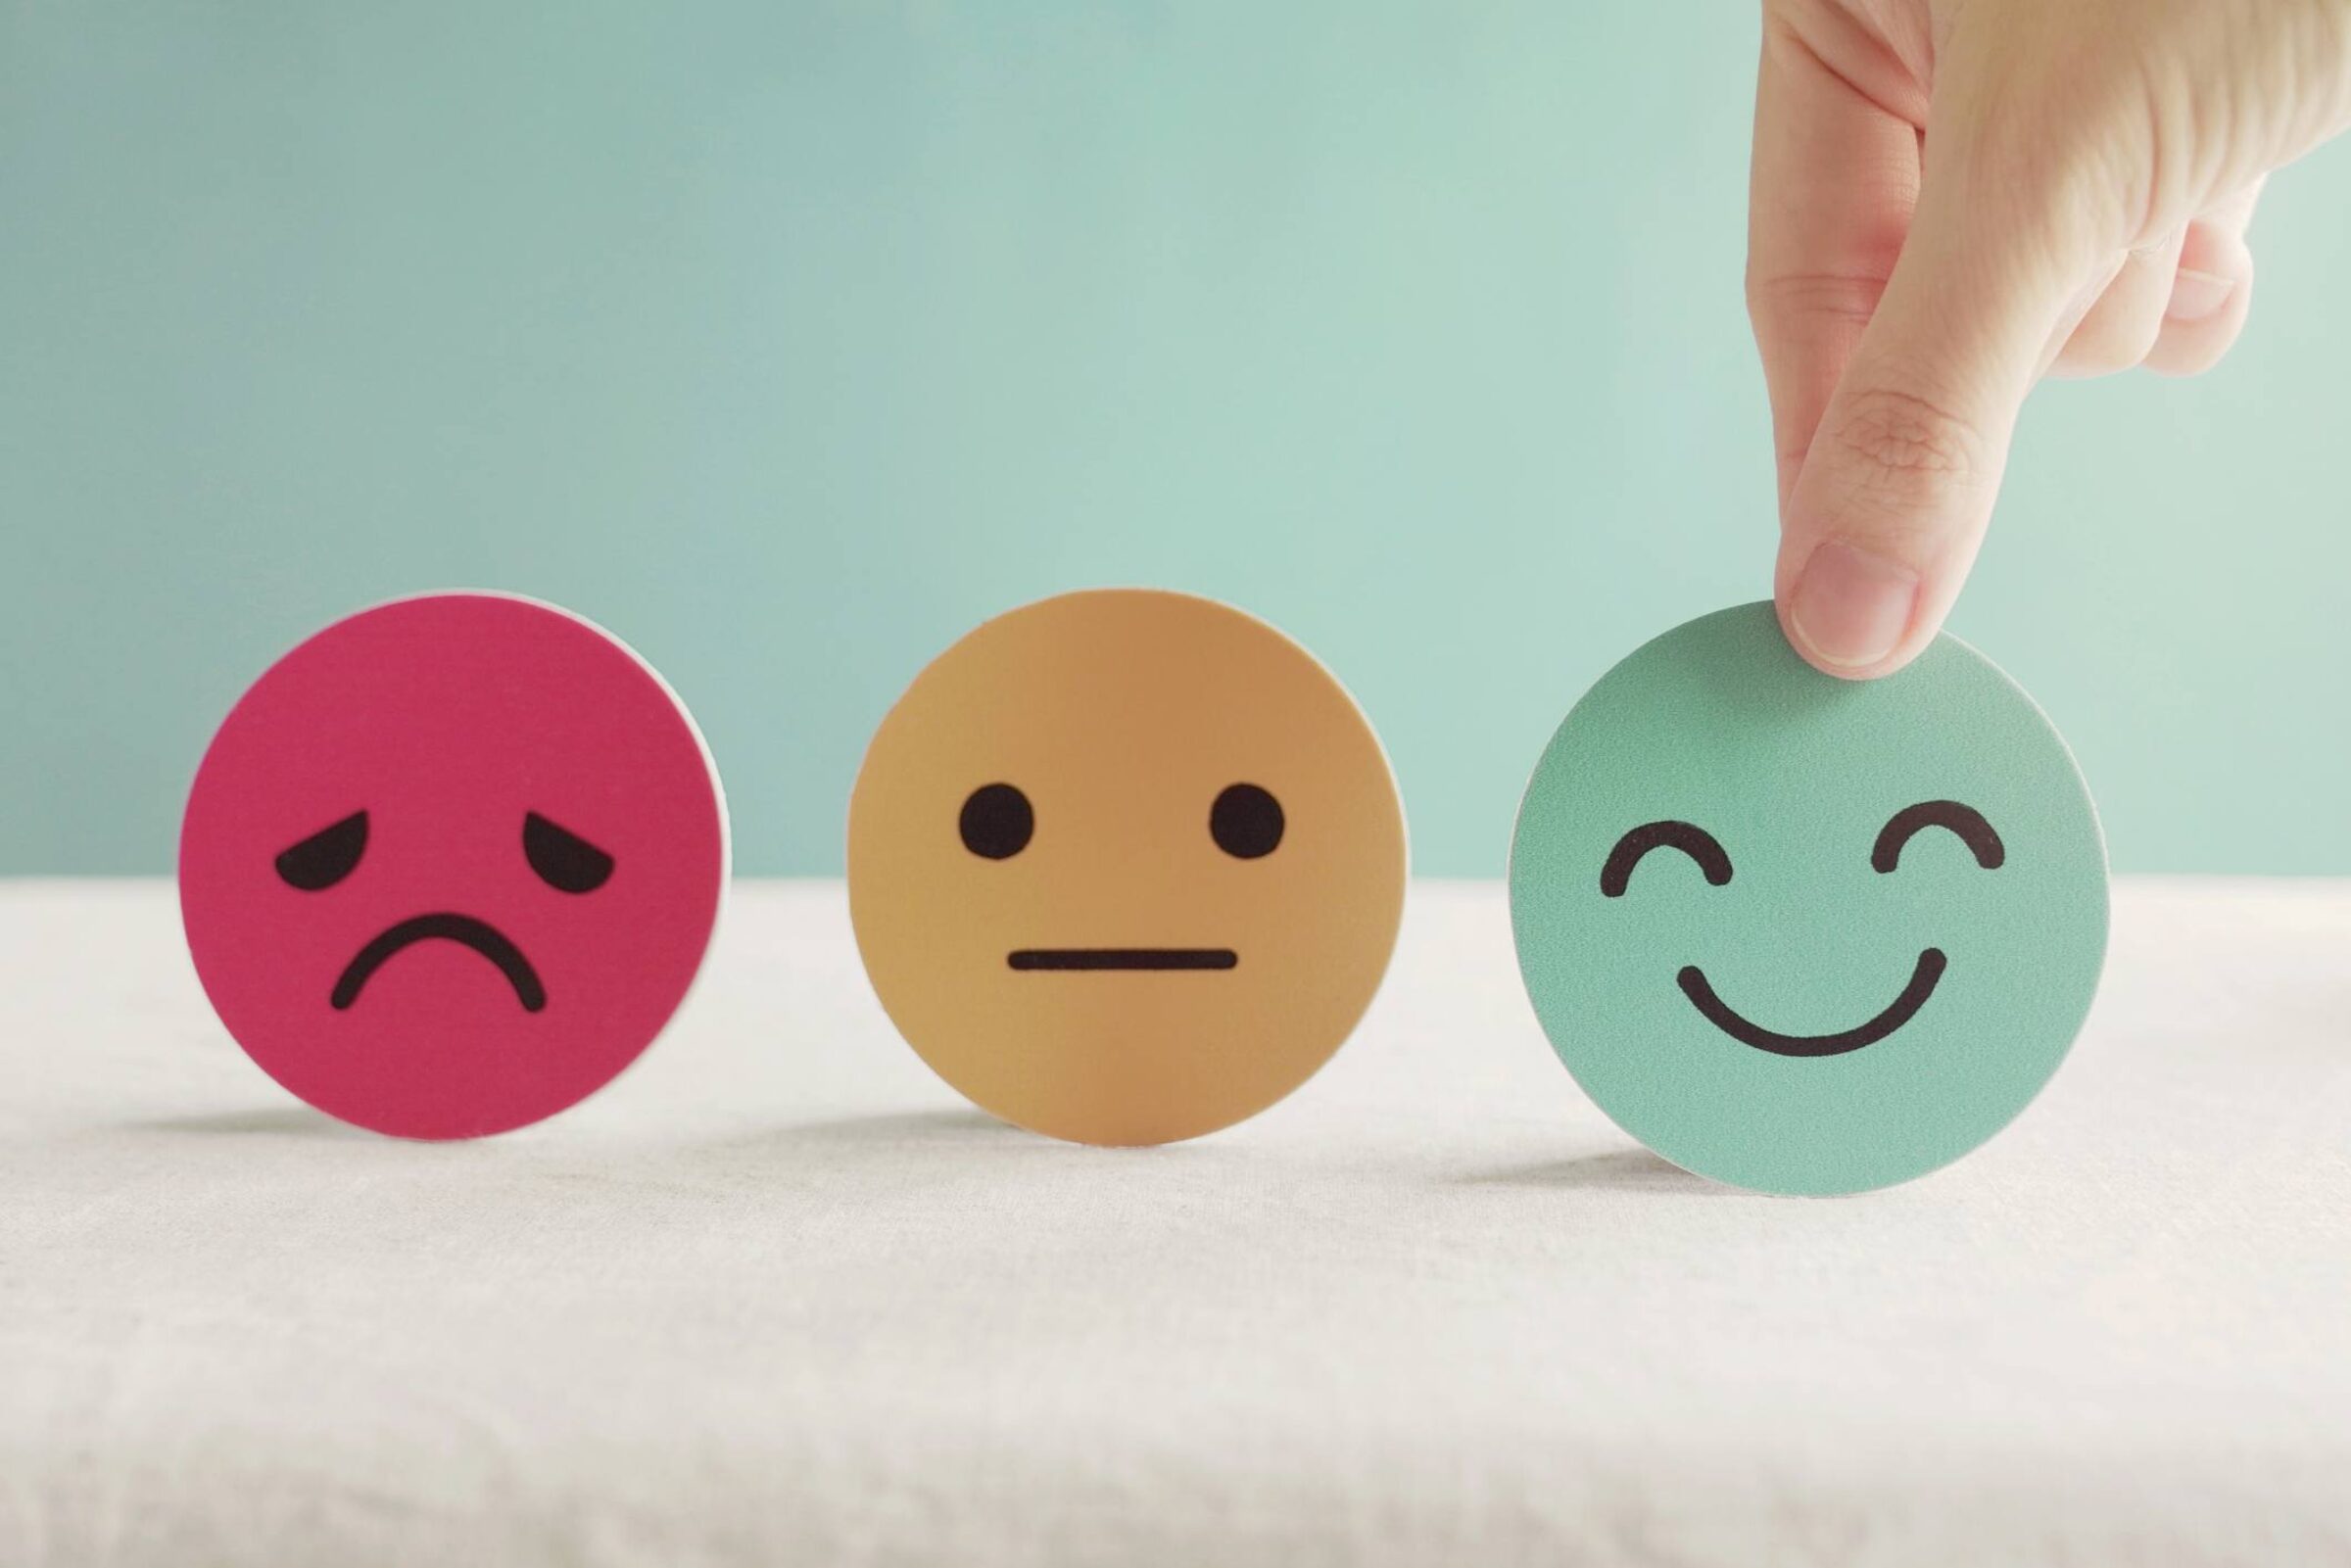 Cut outs of round faces depicting different emotions, with a hand selecting a smiling faces